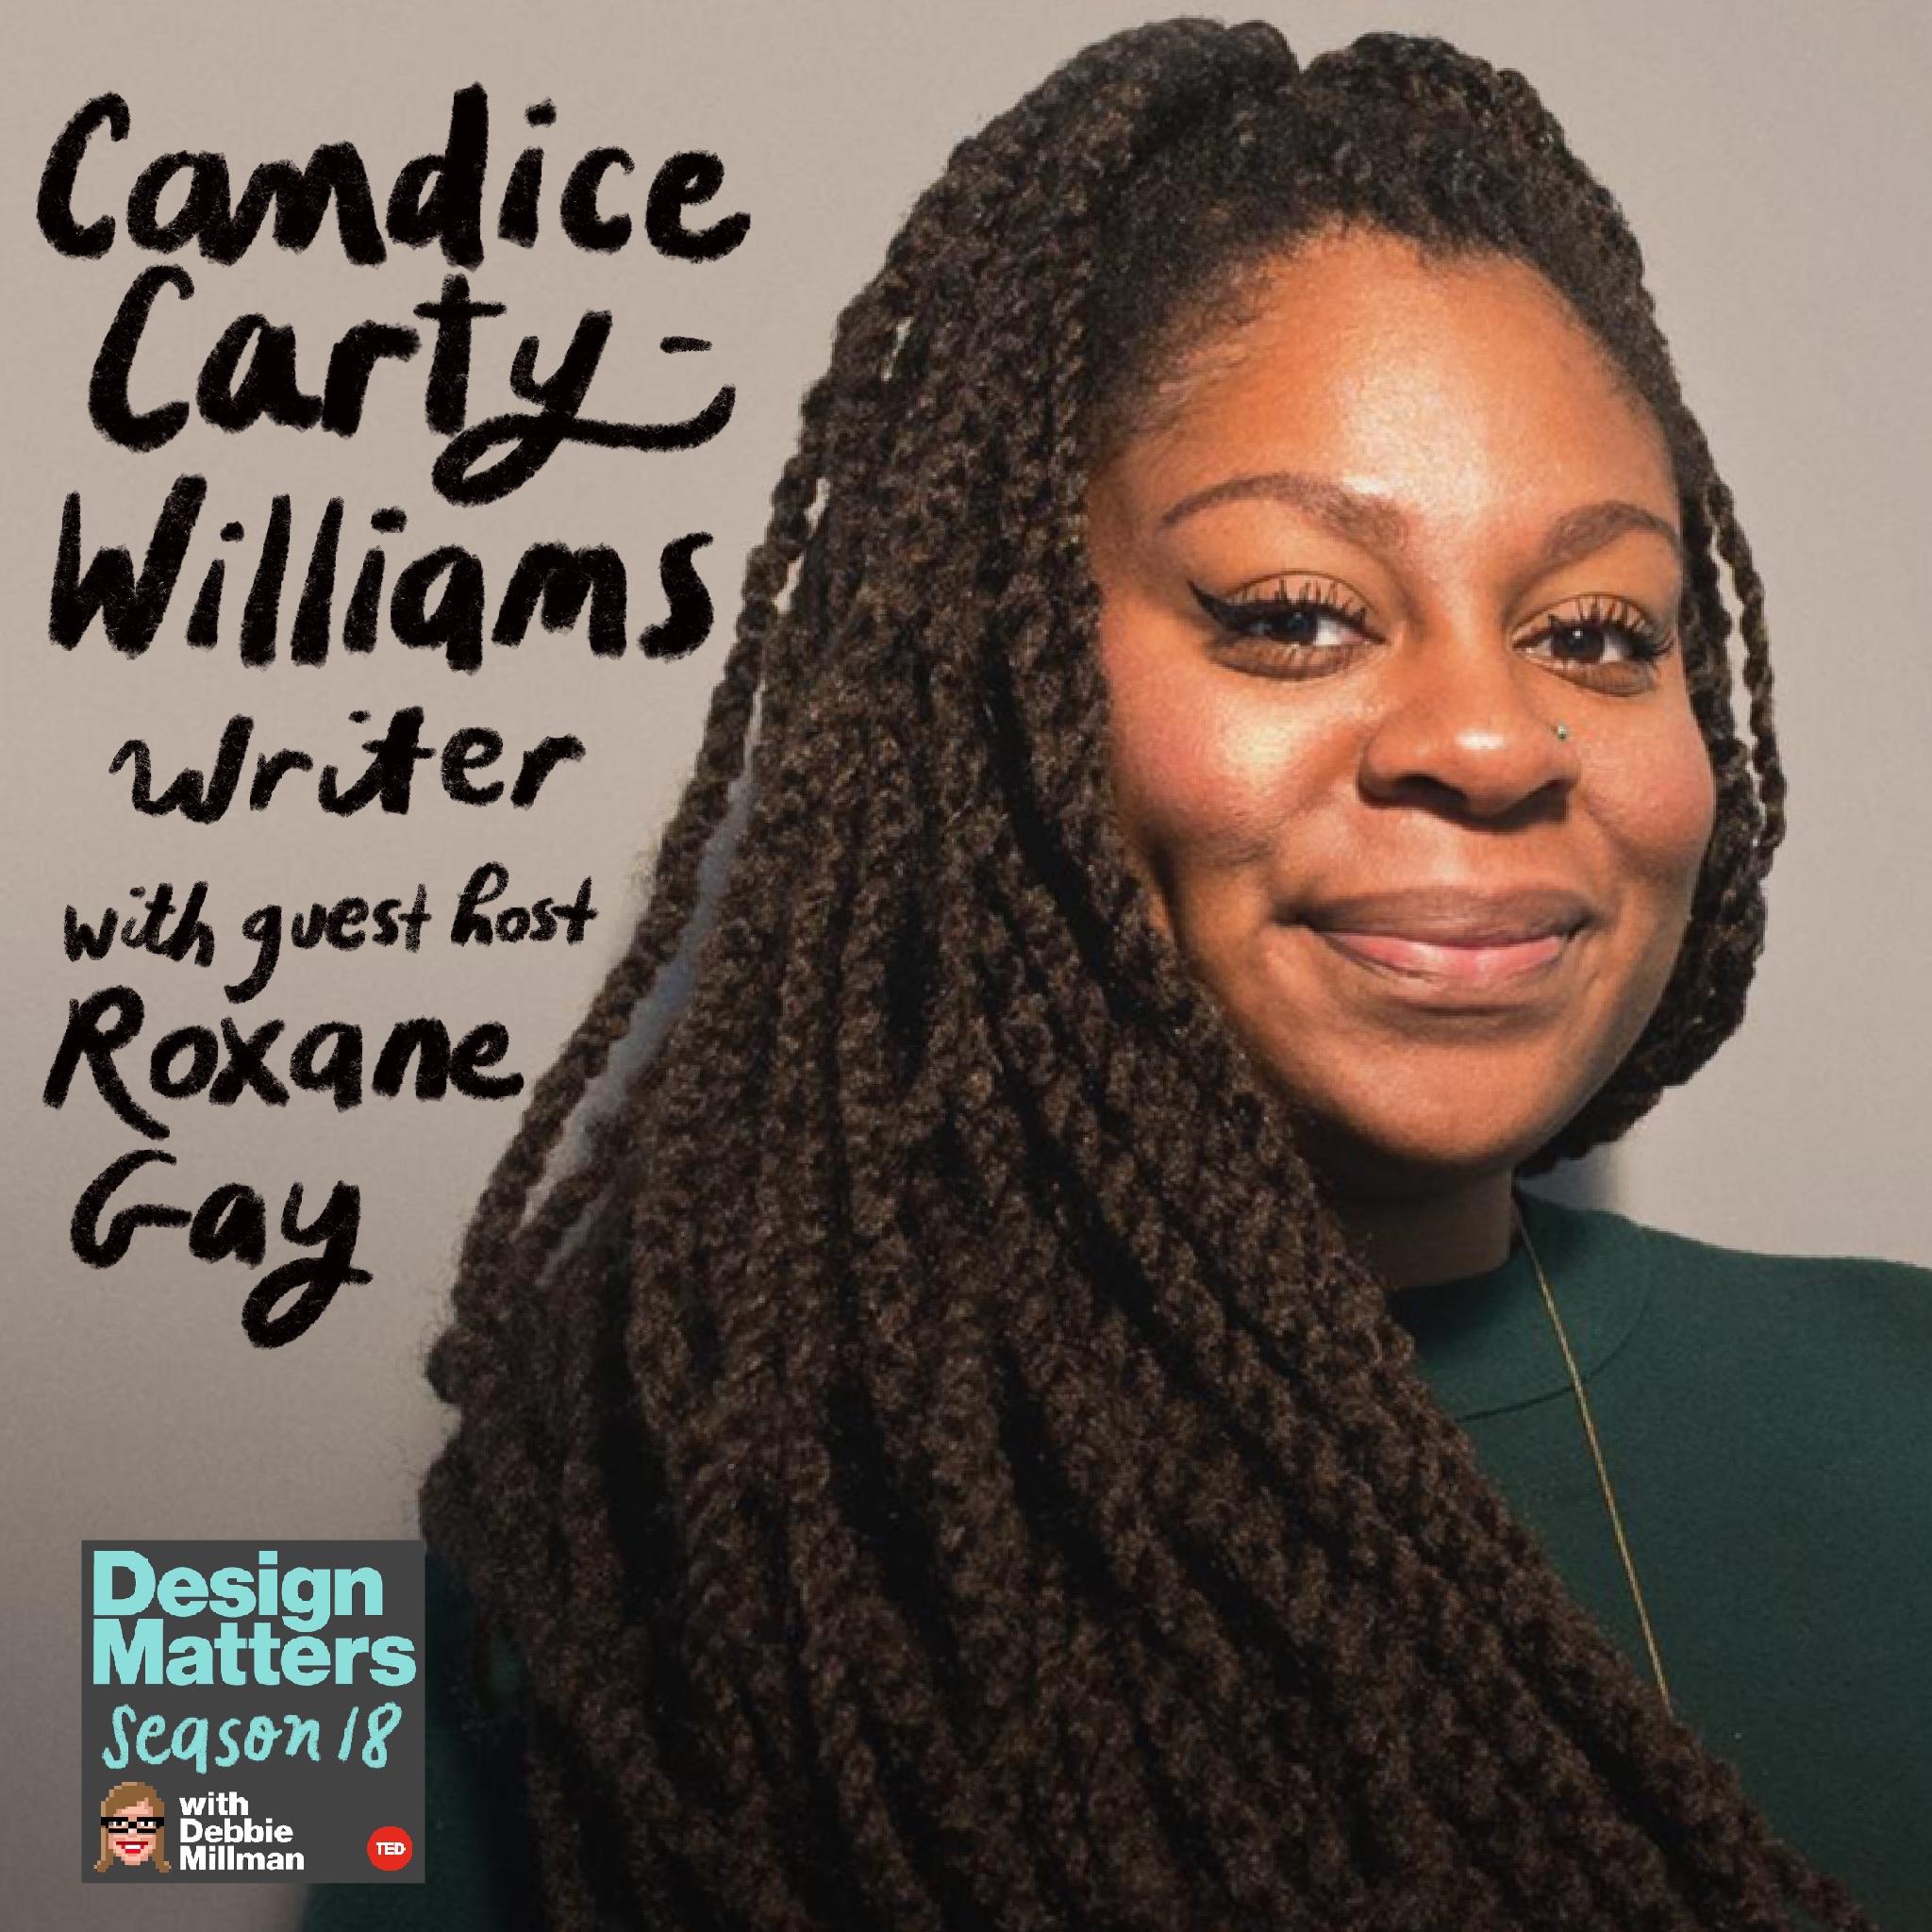 Thumbnail for "Best of Design Matters: Candice Carty-Williams ".